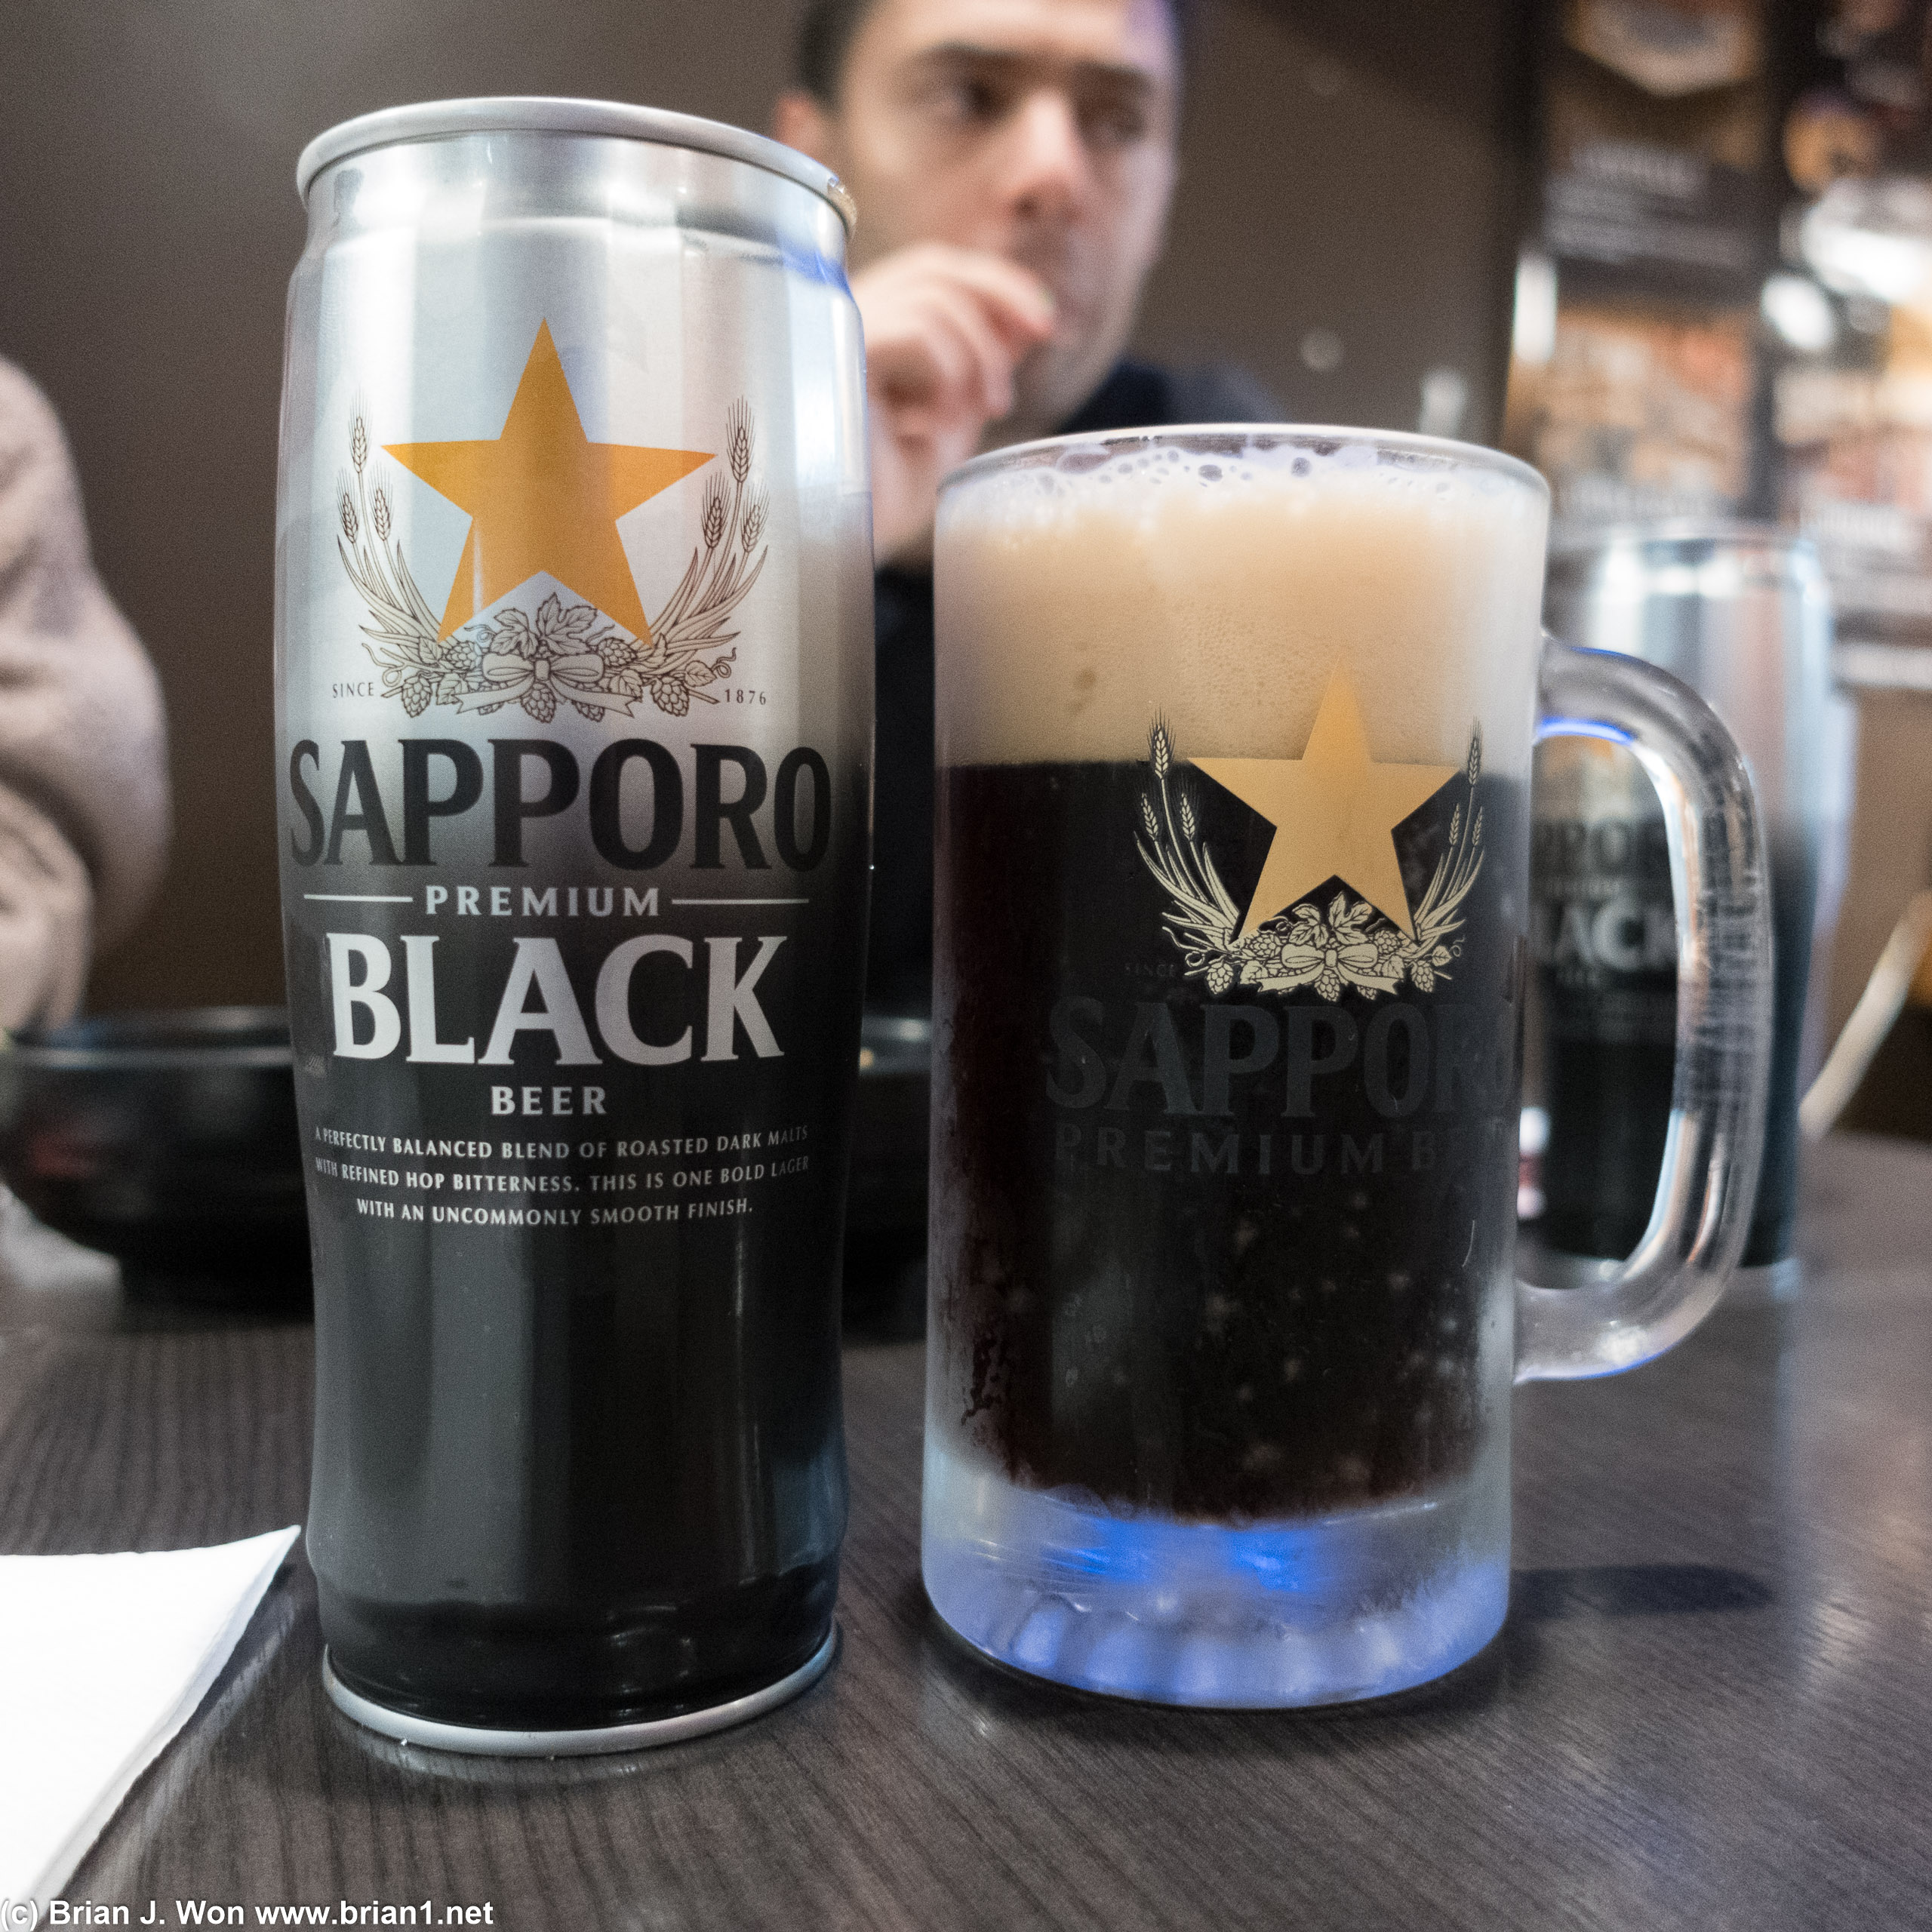 Sapporo Black: it's been too long.